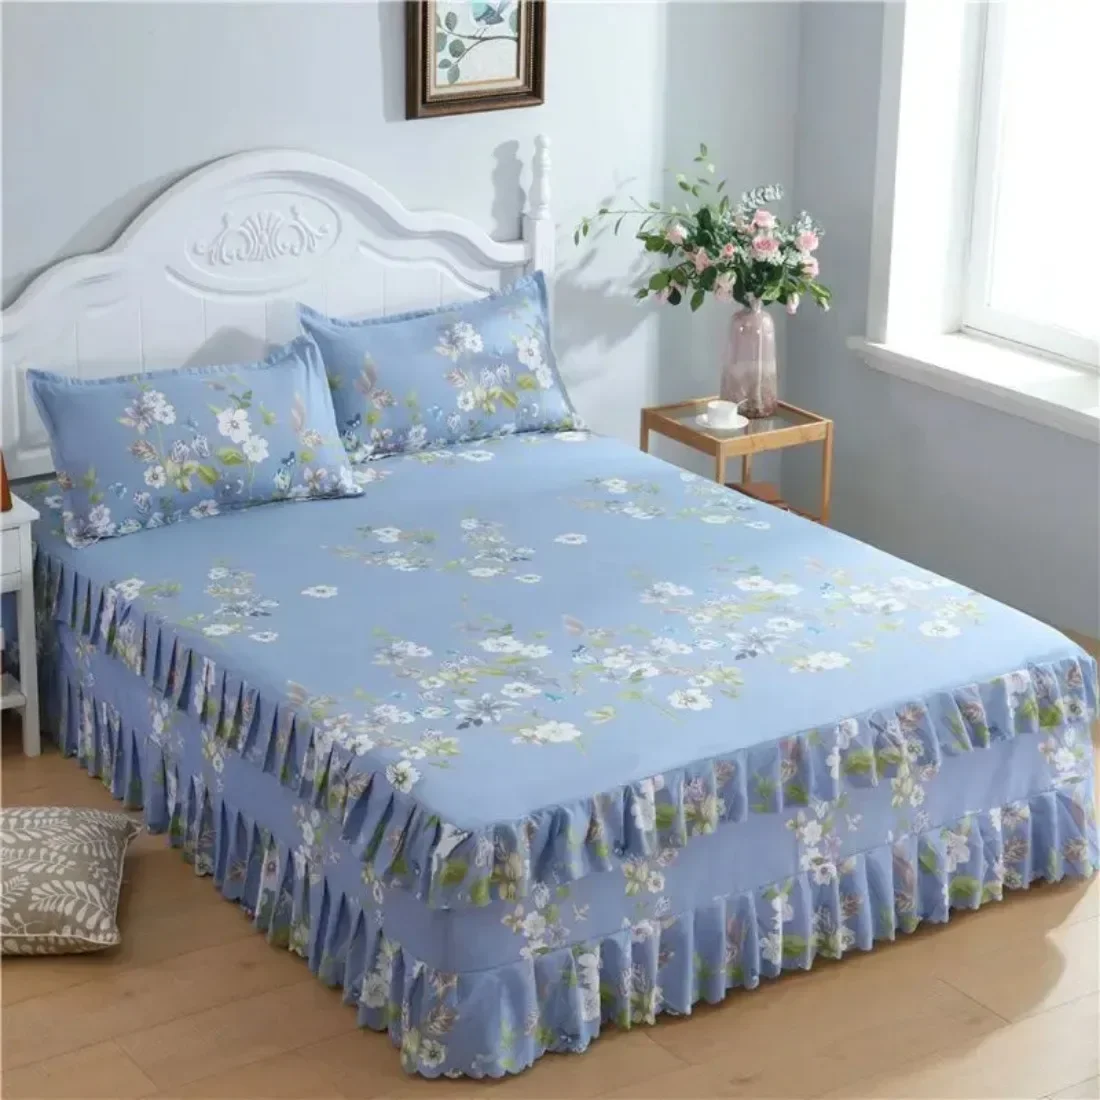 3PCS Bed Skirt Cotton Bedspread Set Embroidery Bed Dress Pillow Cases 3 Pieces/Set For King/Queen Double 1.5/1.8/2M Sheet Cover